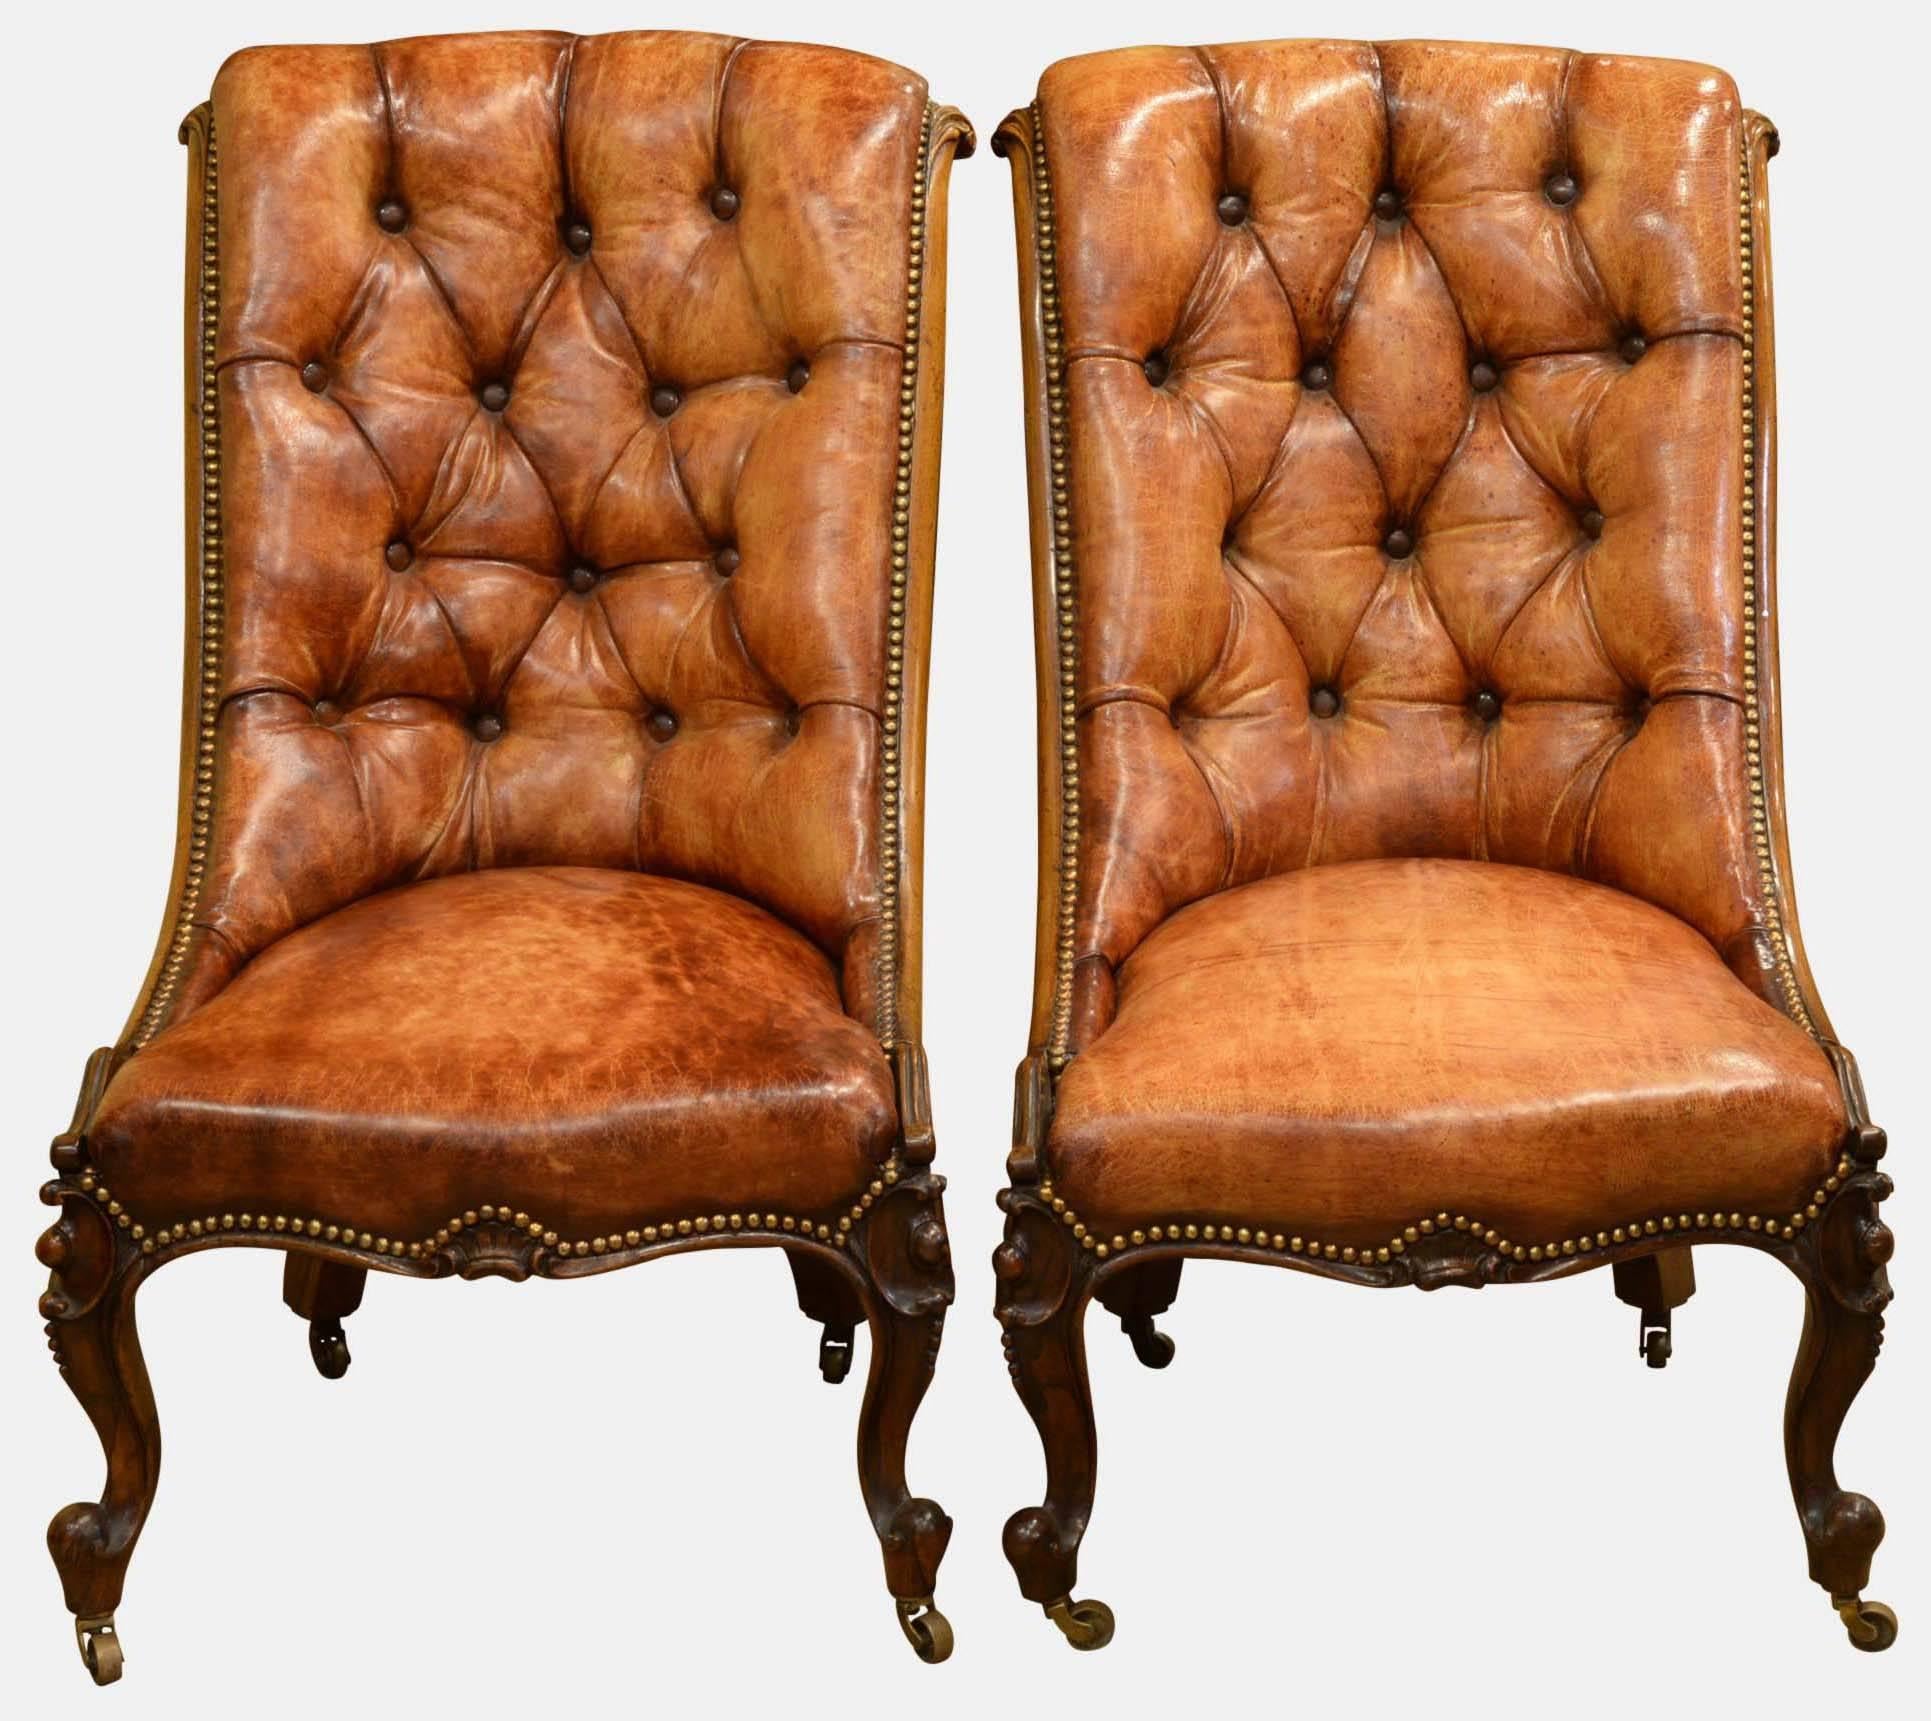 A pair of mid-19th century buttoned leather rosewood chairs by Flashman of Dover.

Dated 1856 on original scrim.